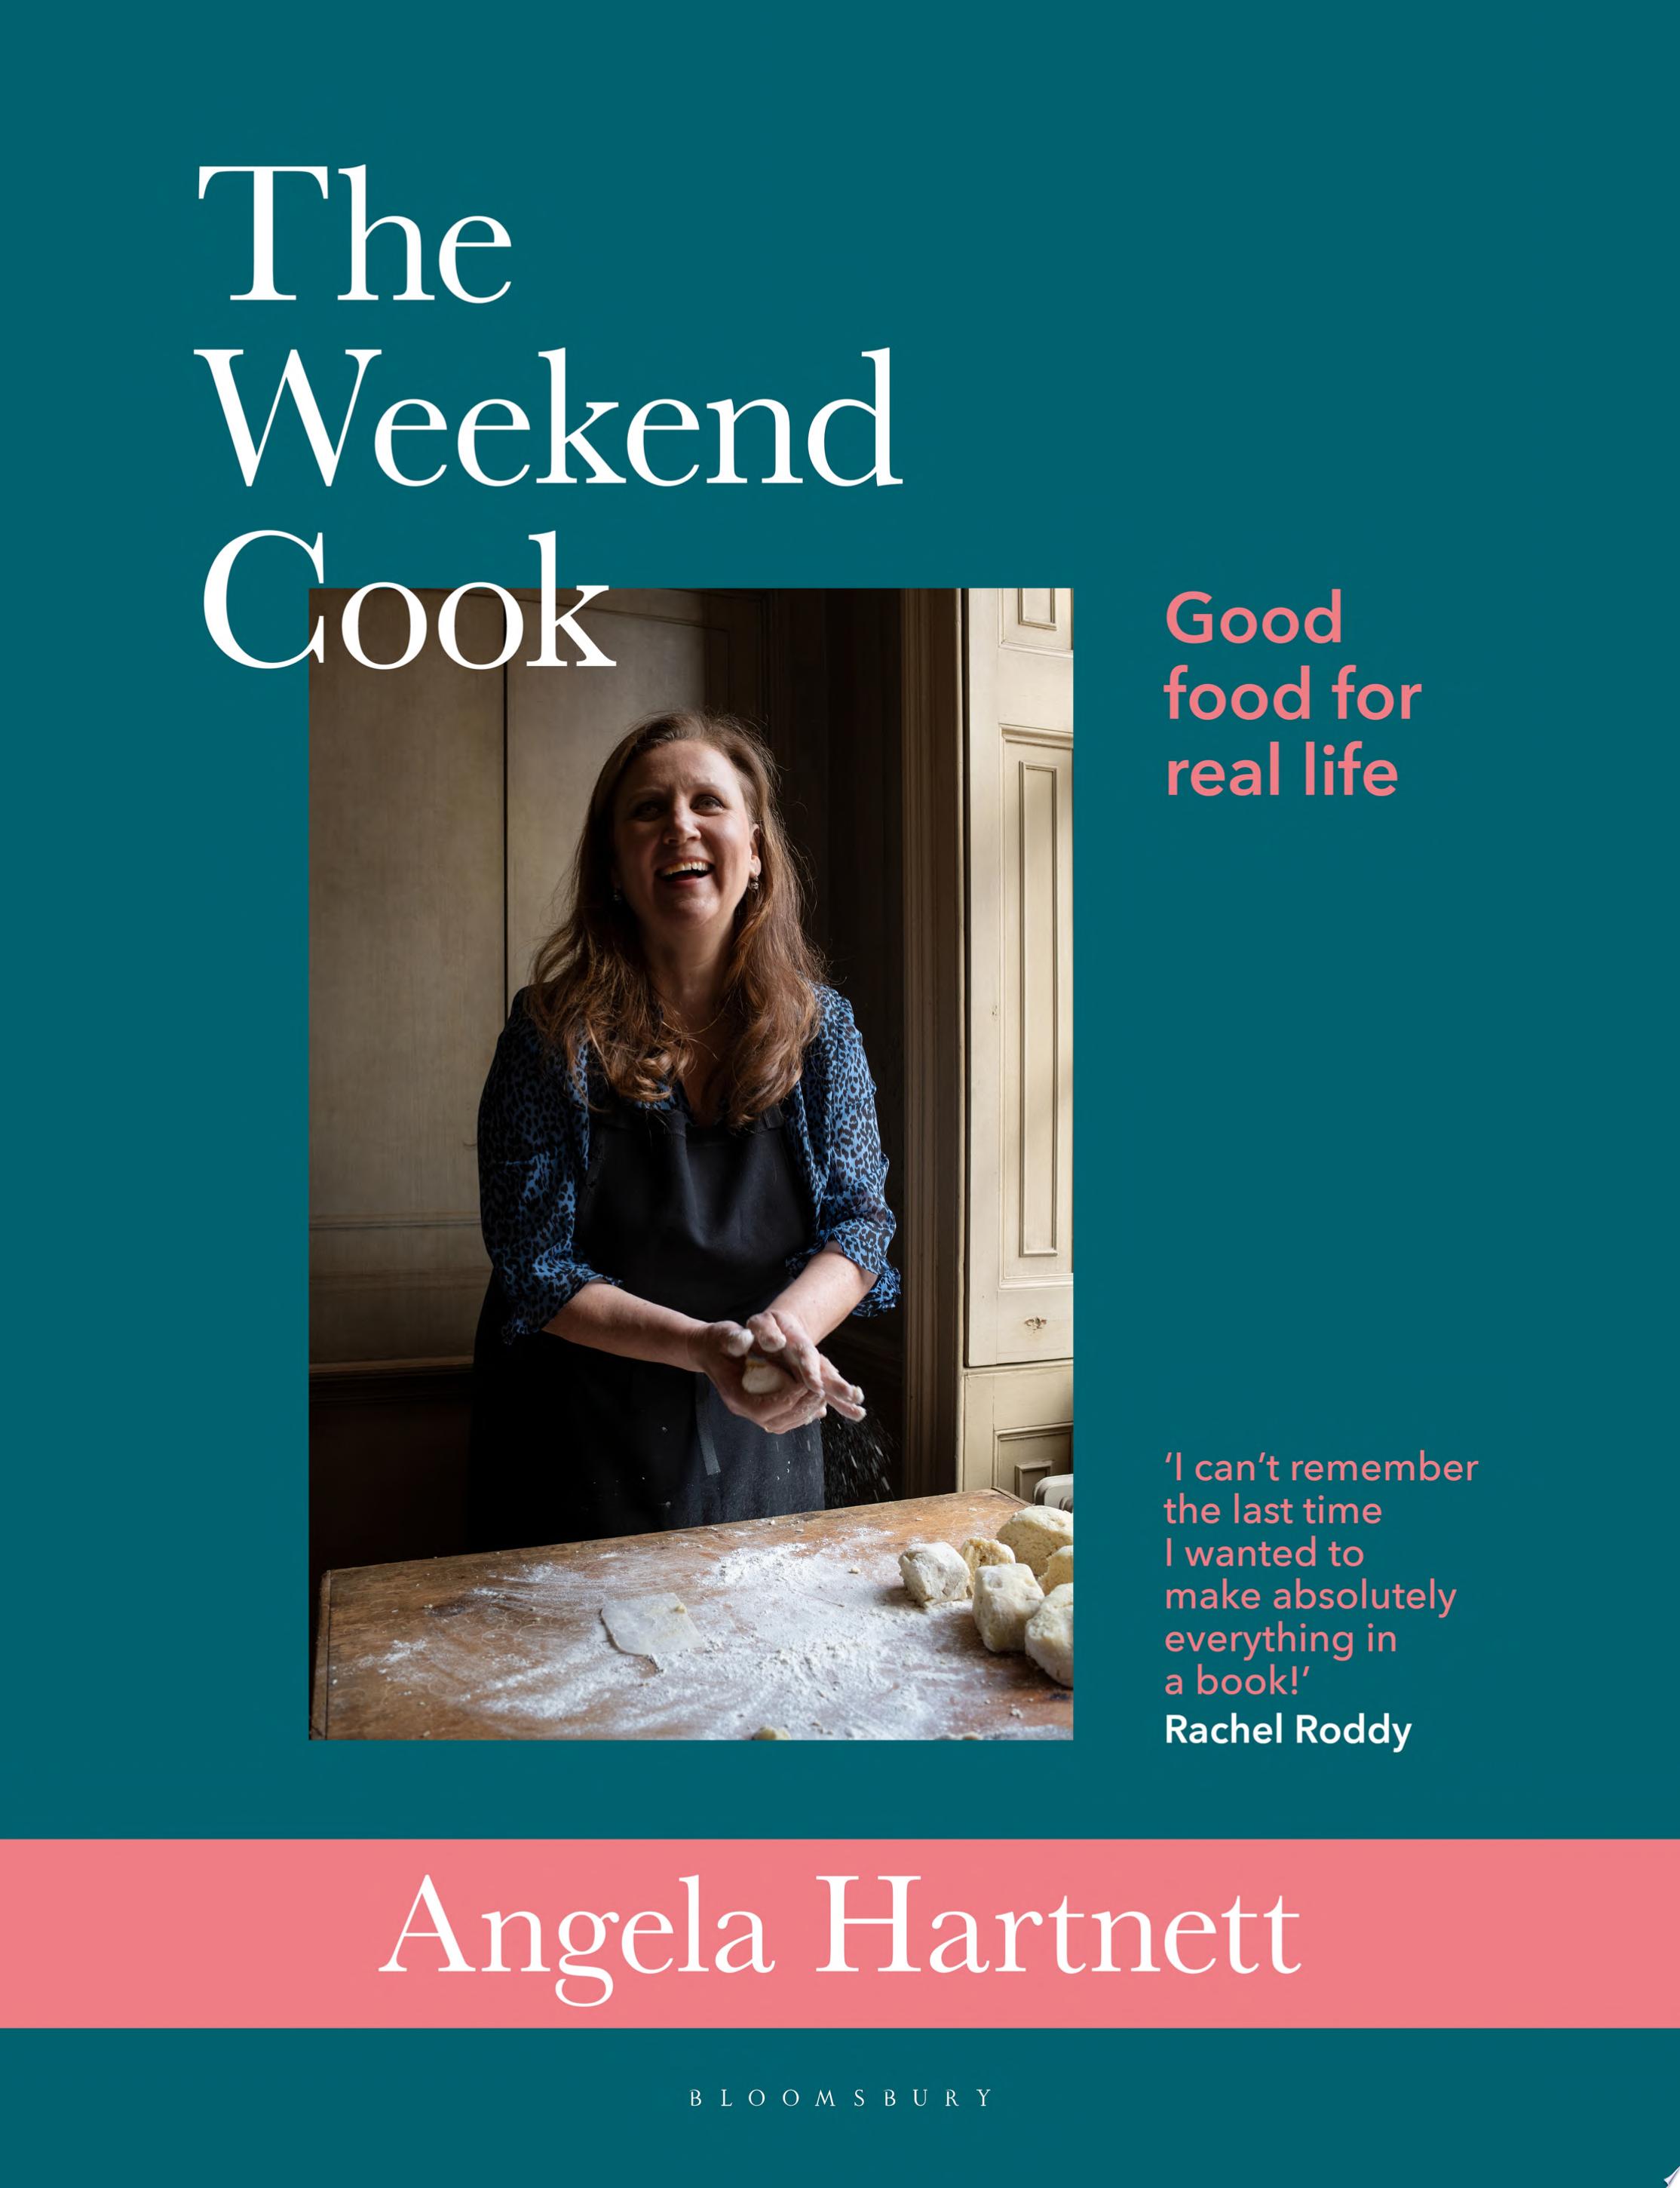 Image for "The Weekend Cook"